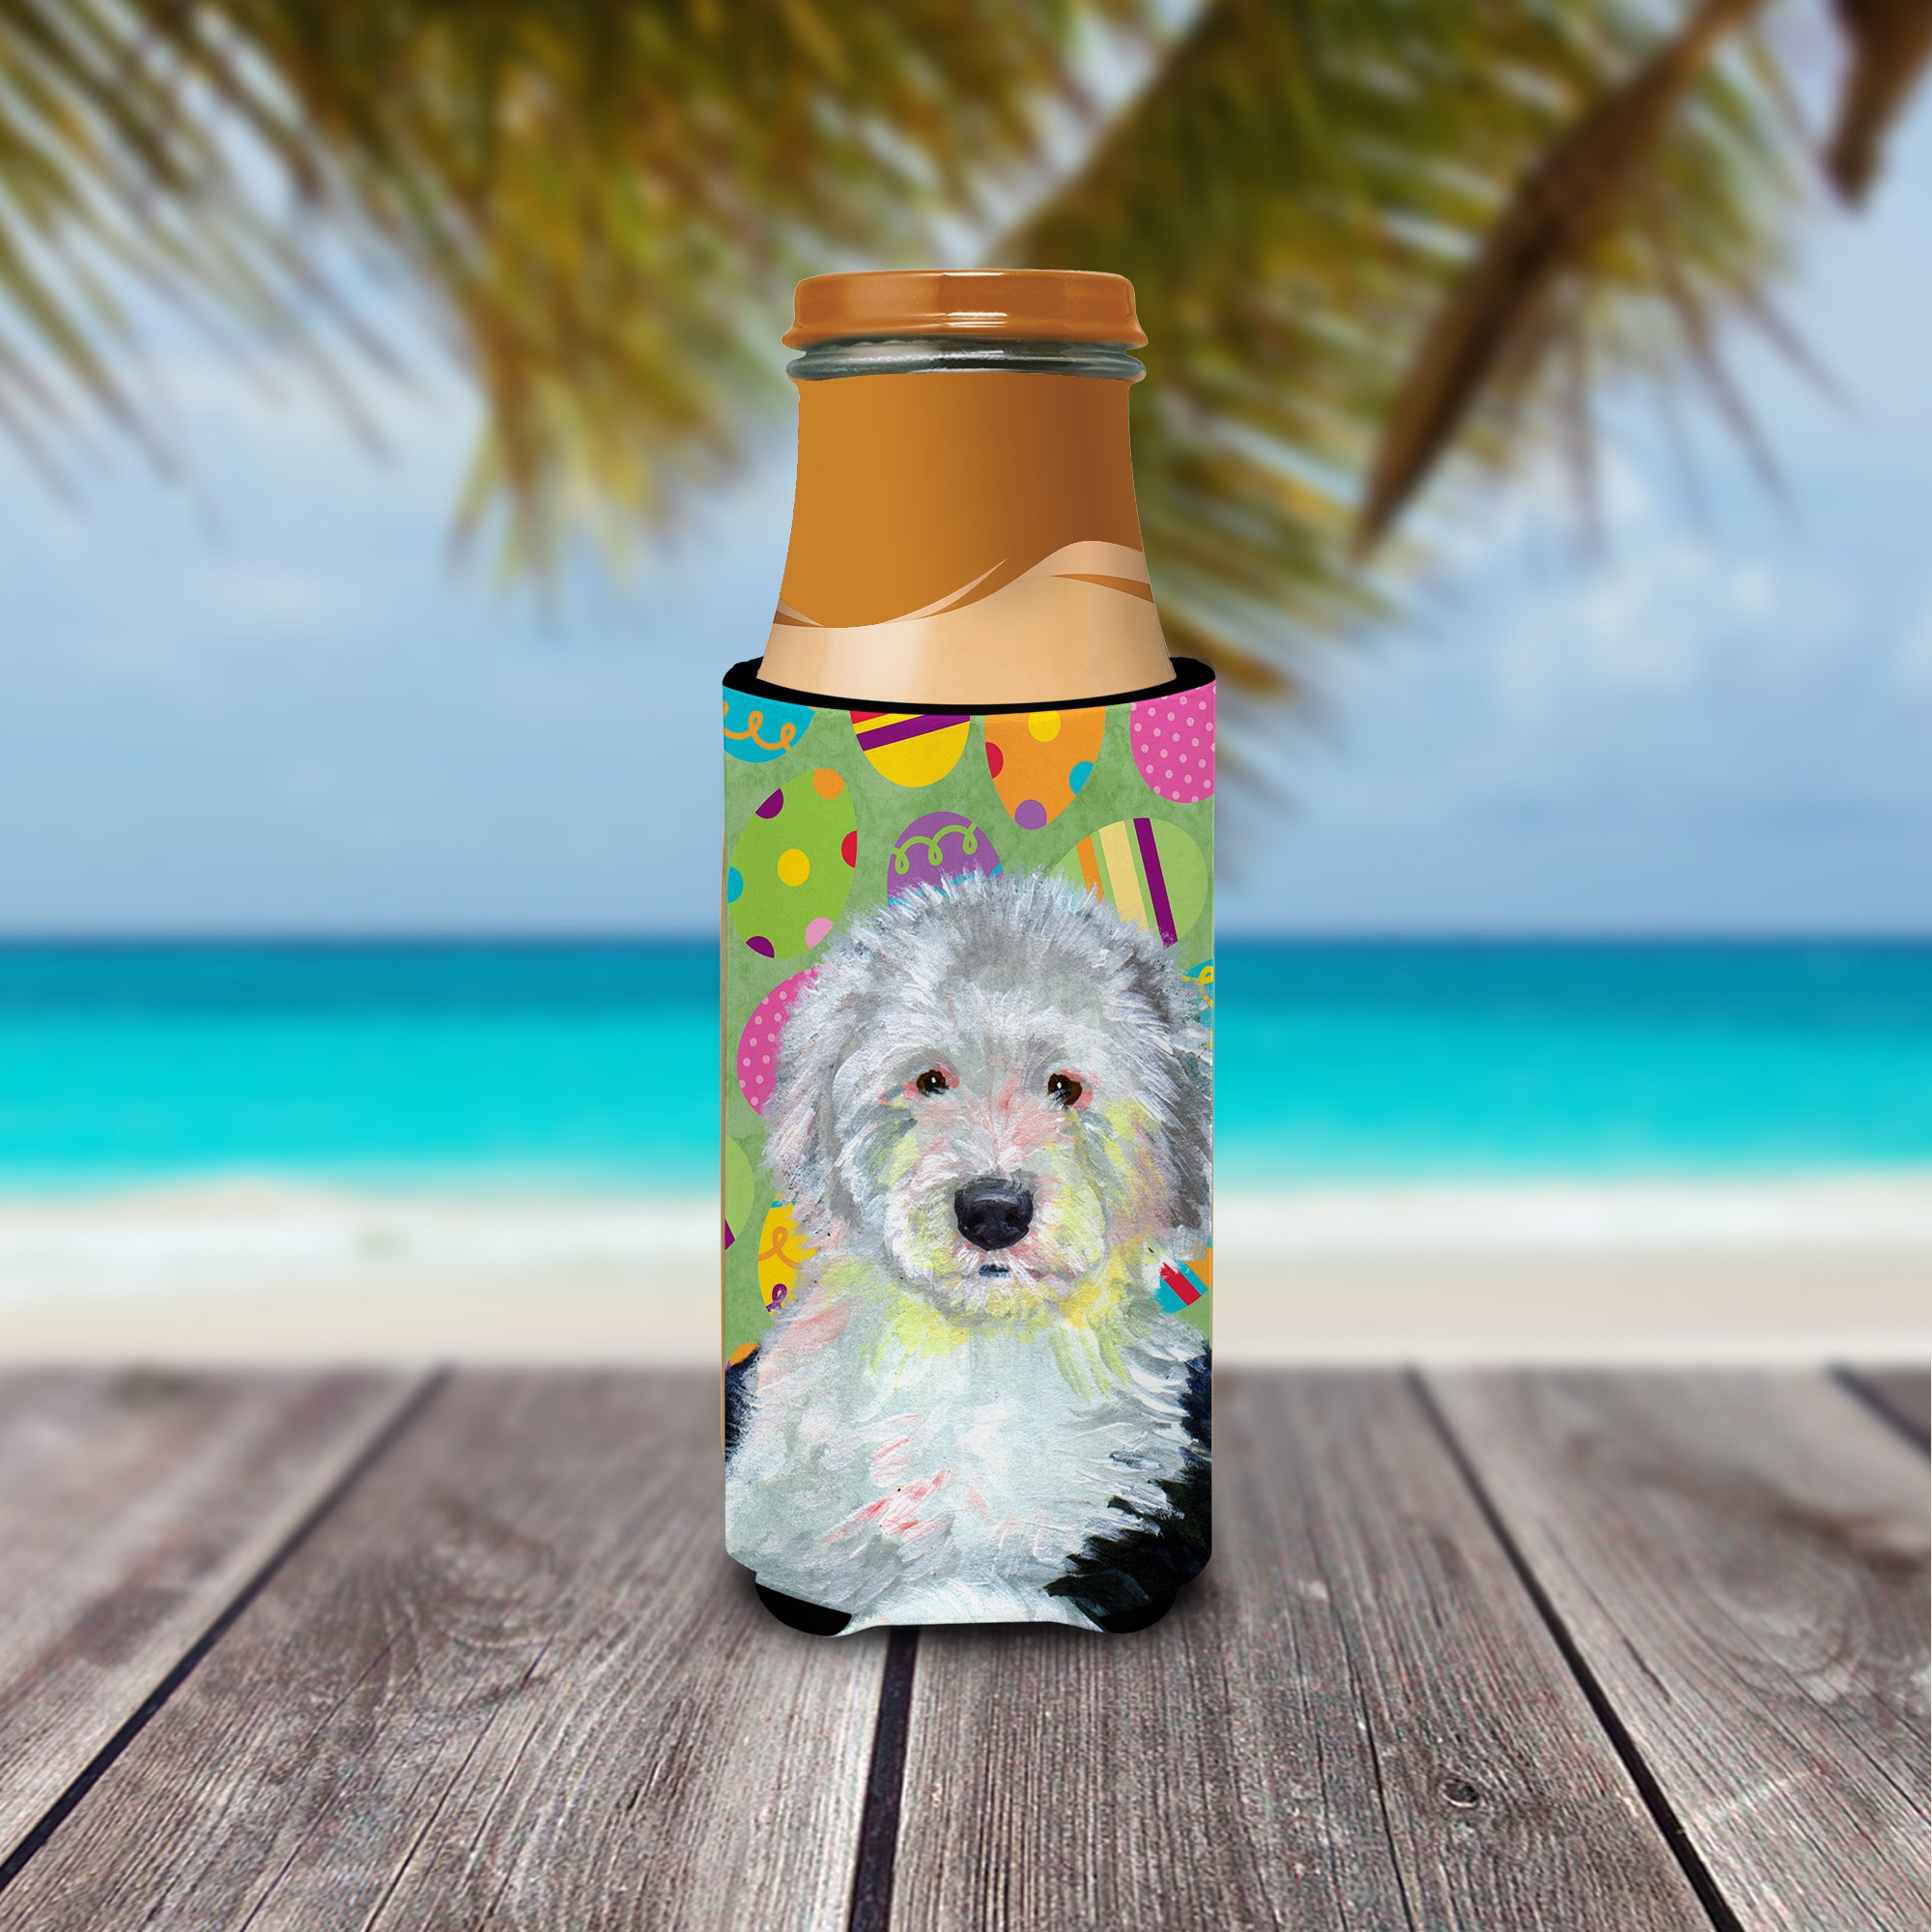 Old English Sheepdog Easter Eggtravaganza Ultra Beverage Insulators for slim cans LH9441MUK